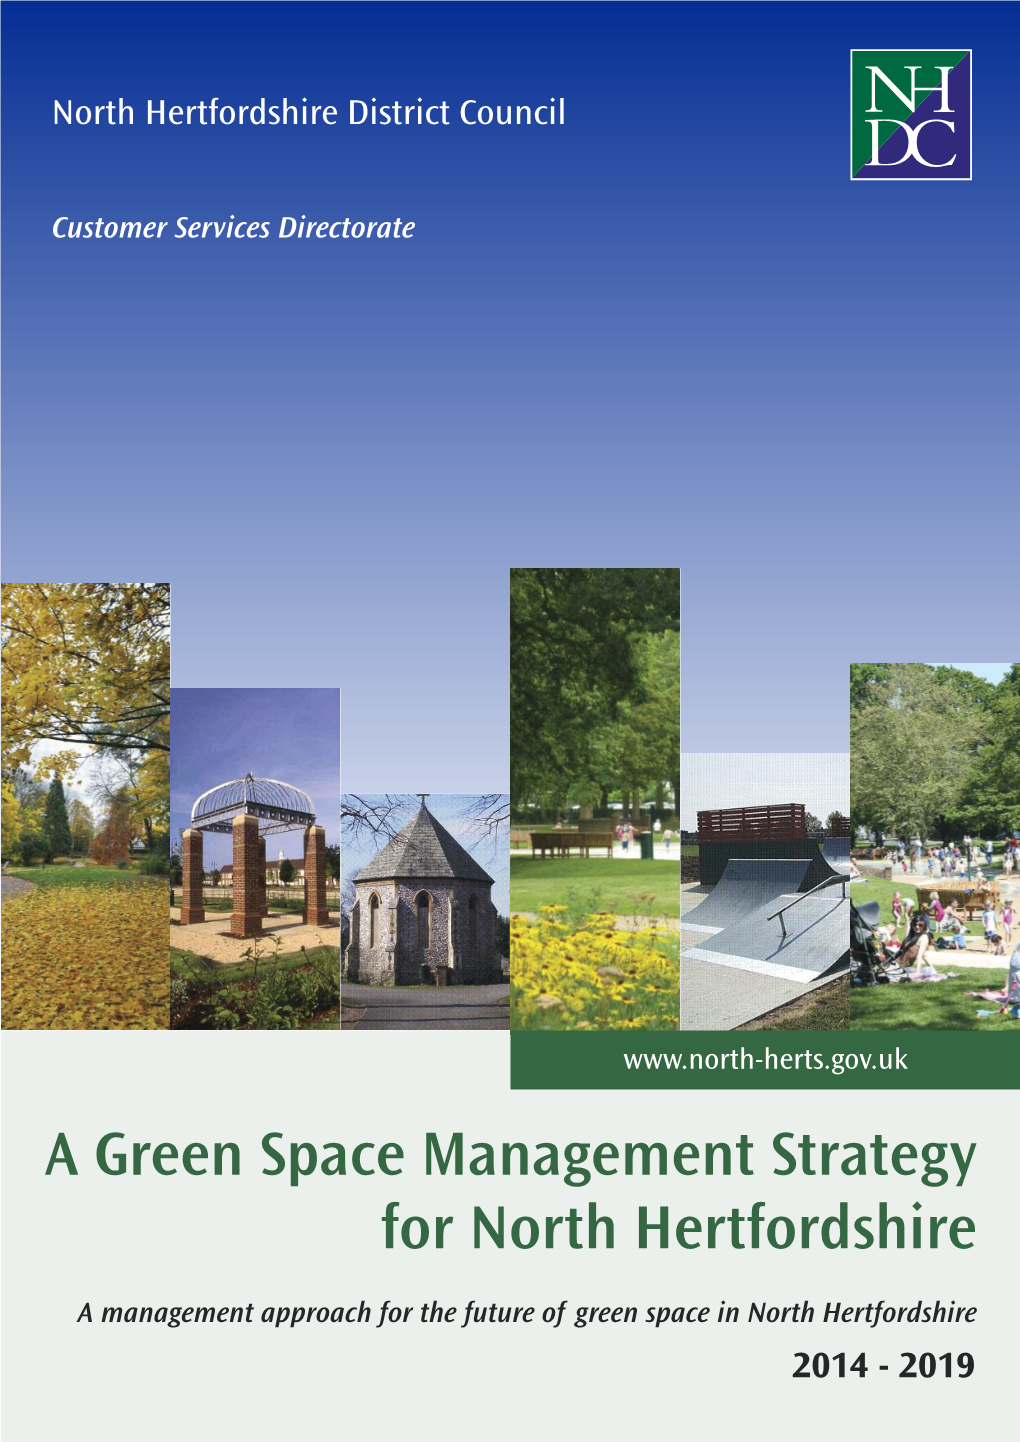 A Green Space Management Strategy for North Hertfordshire